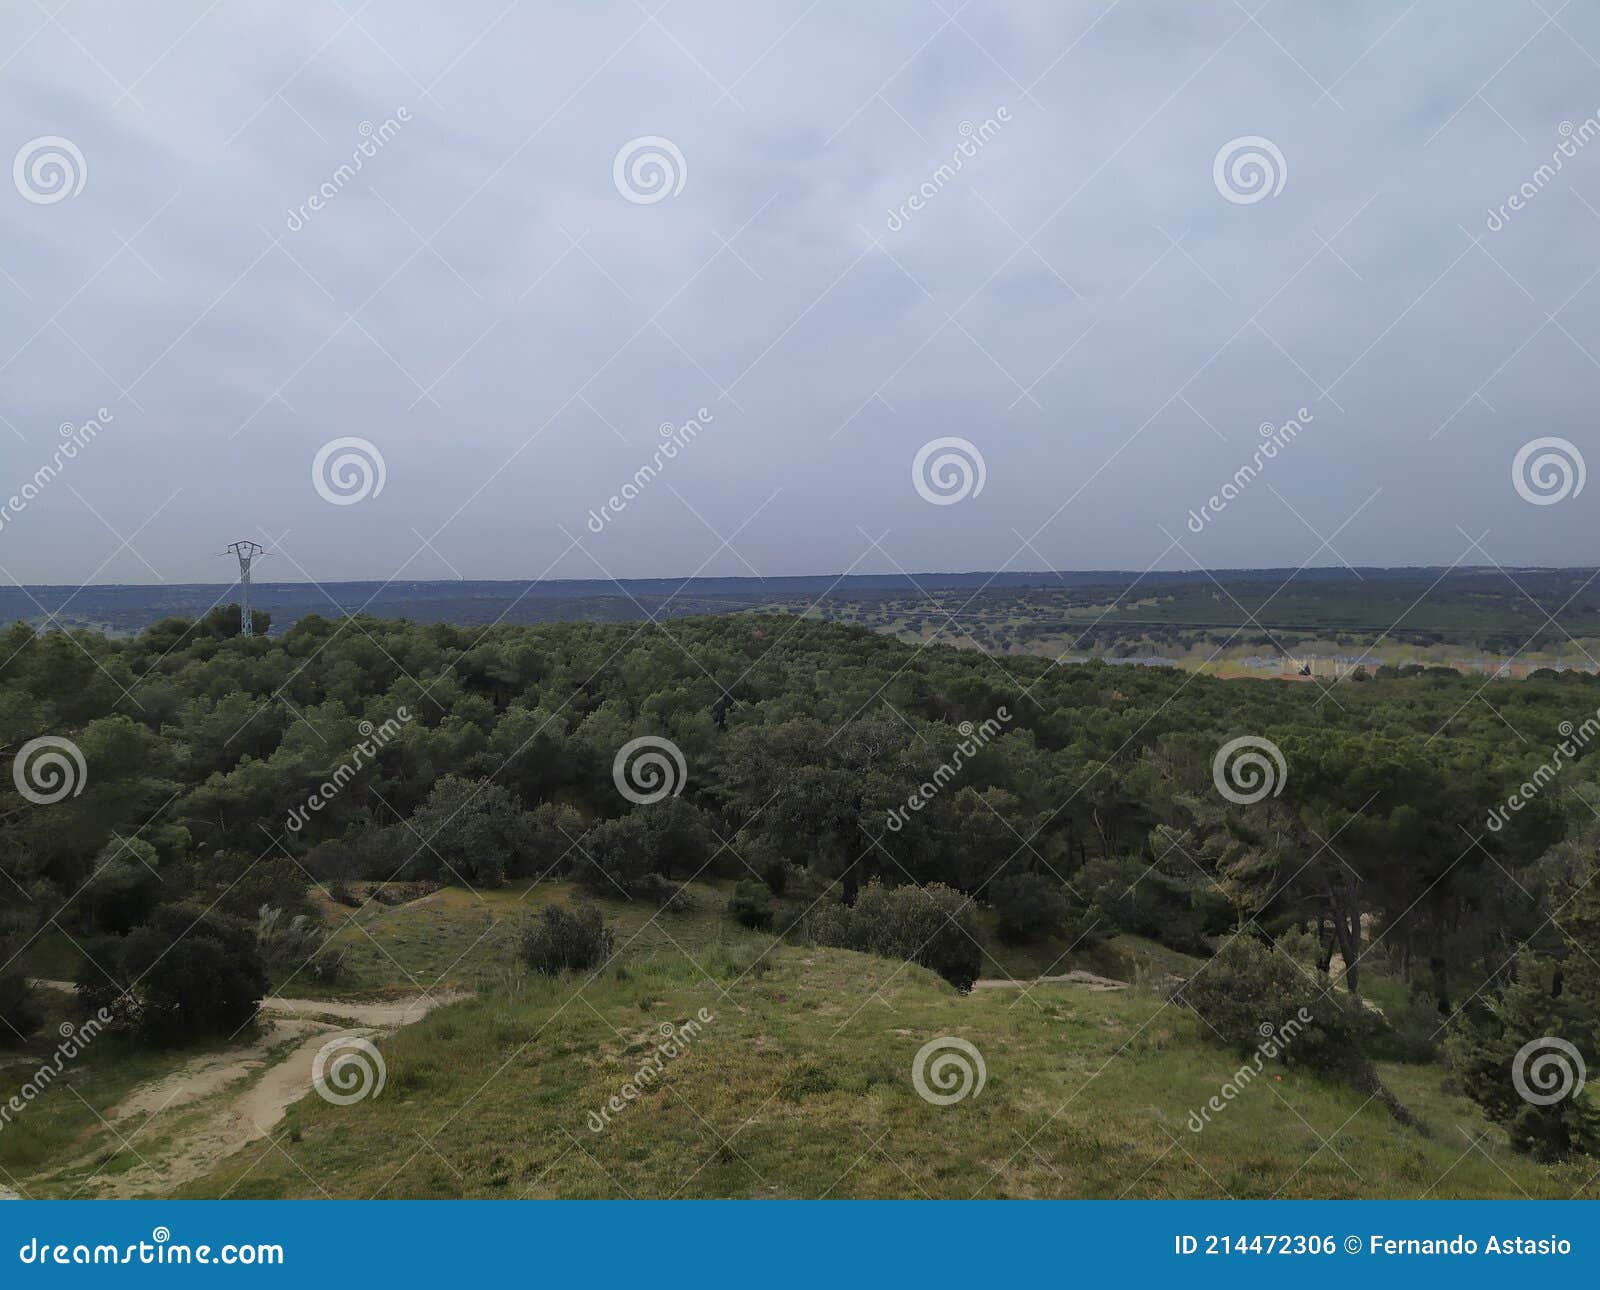 view from the el pardo forest of the city of madrid, in spain.